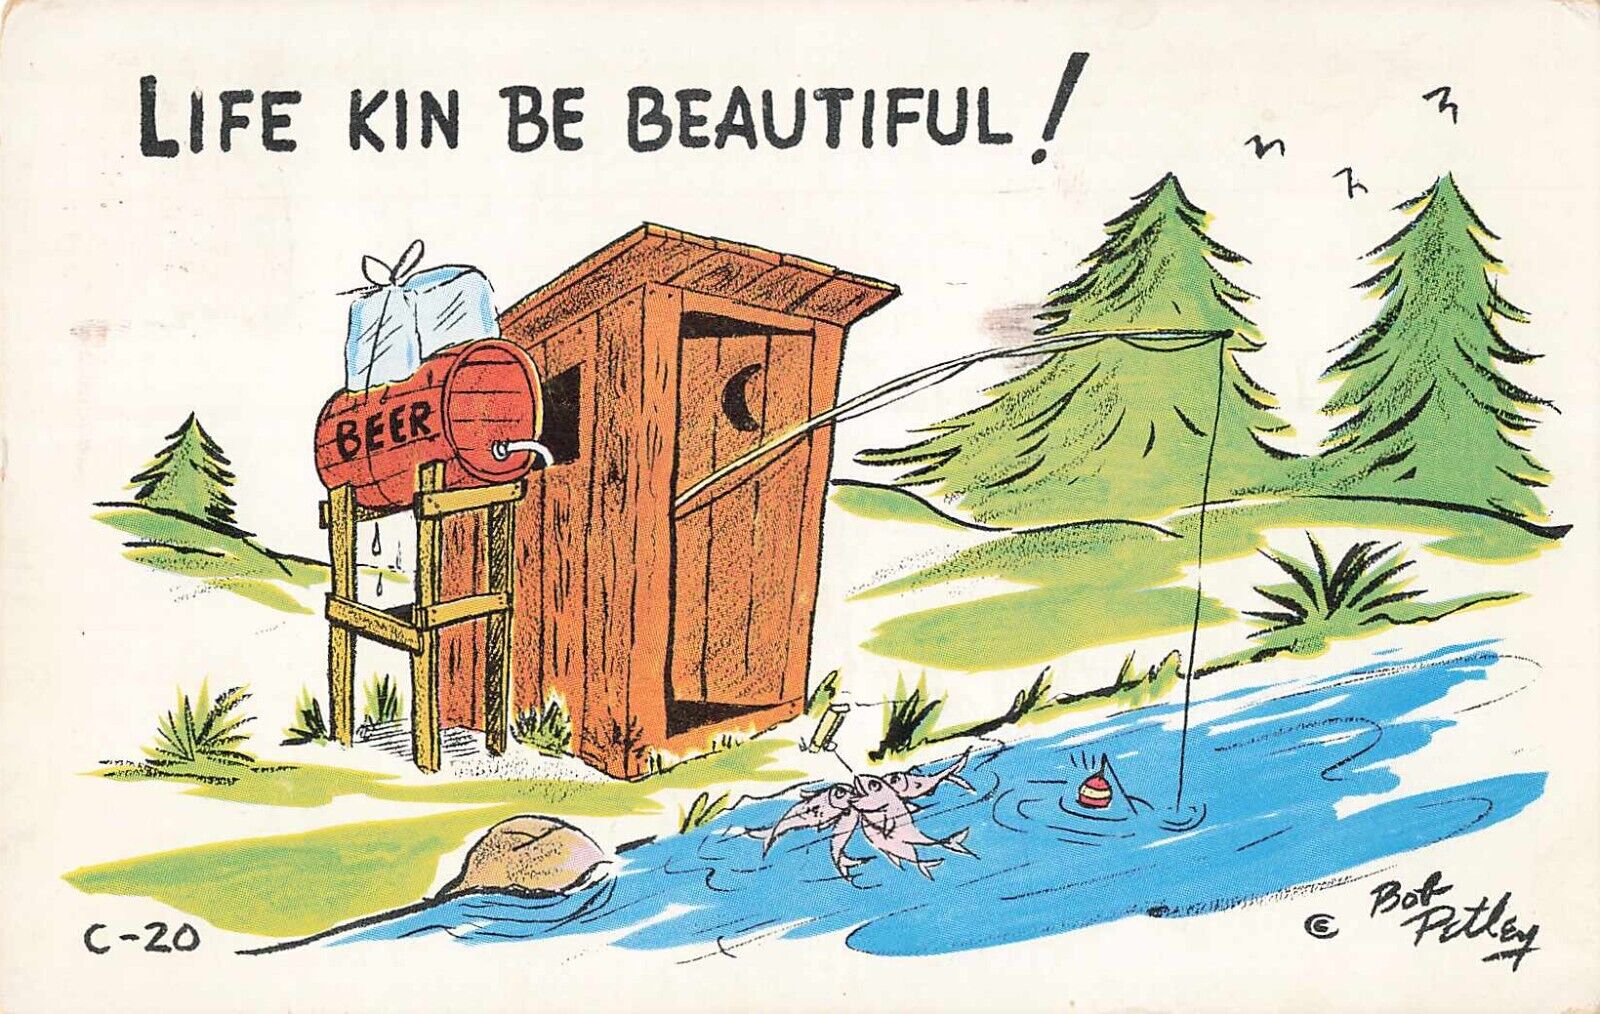 Postcard Vintage Bob Petley Life Kin Be Beautiful Beer, Fishing In Outhouse C-20